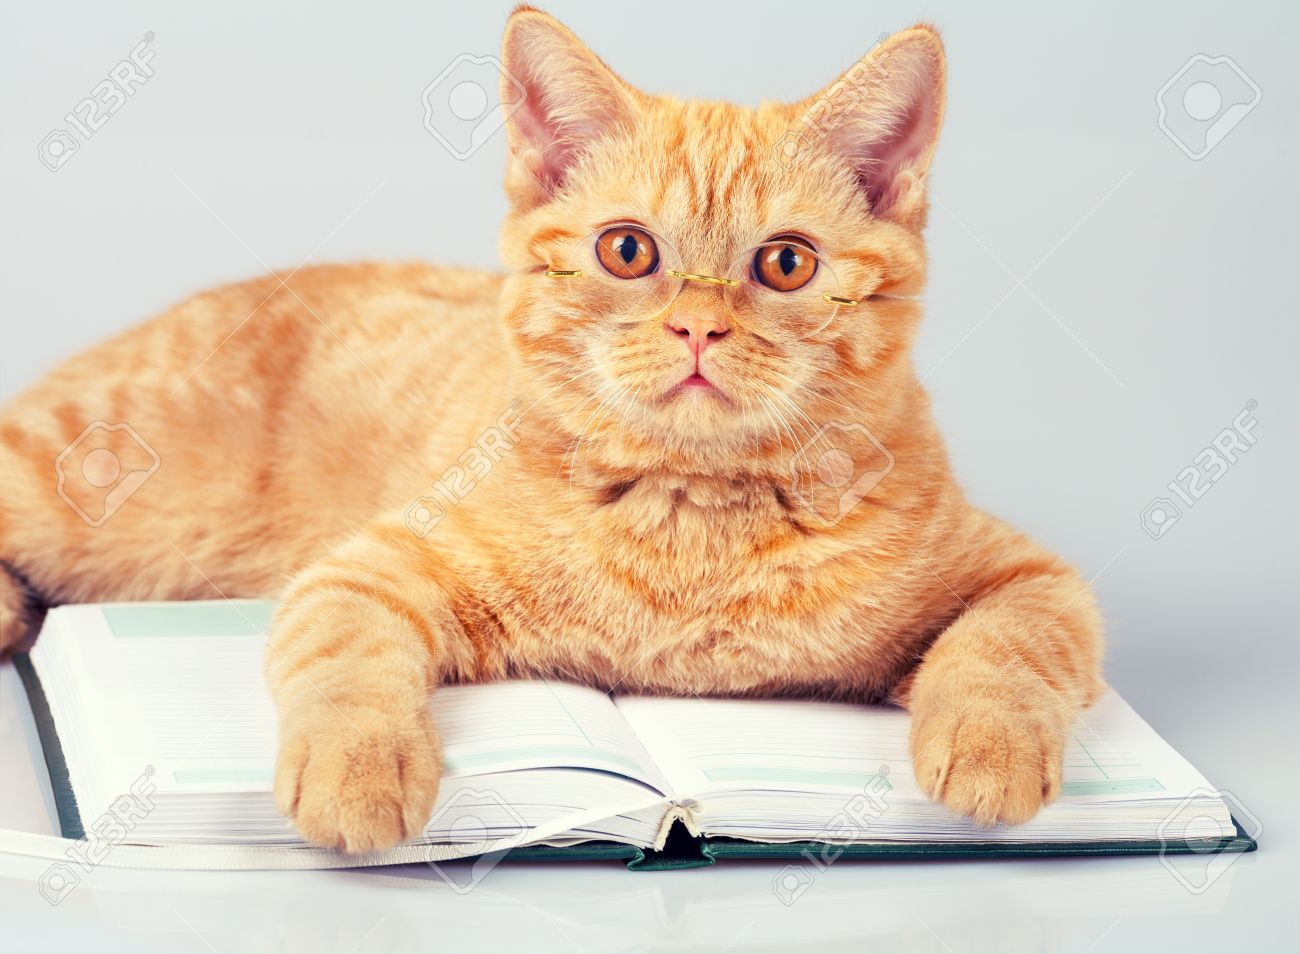 Scholarly kitty: cat reading a book in preparation for the purr-fect exam.